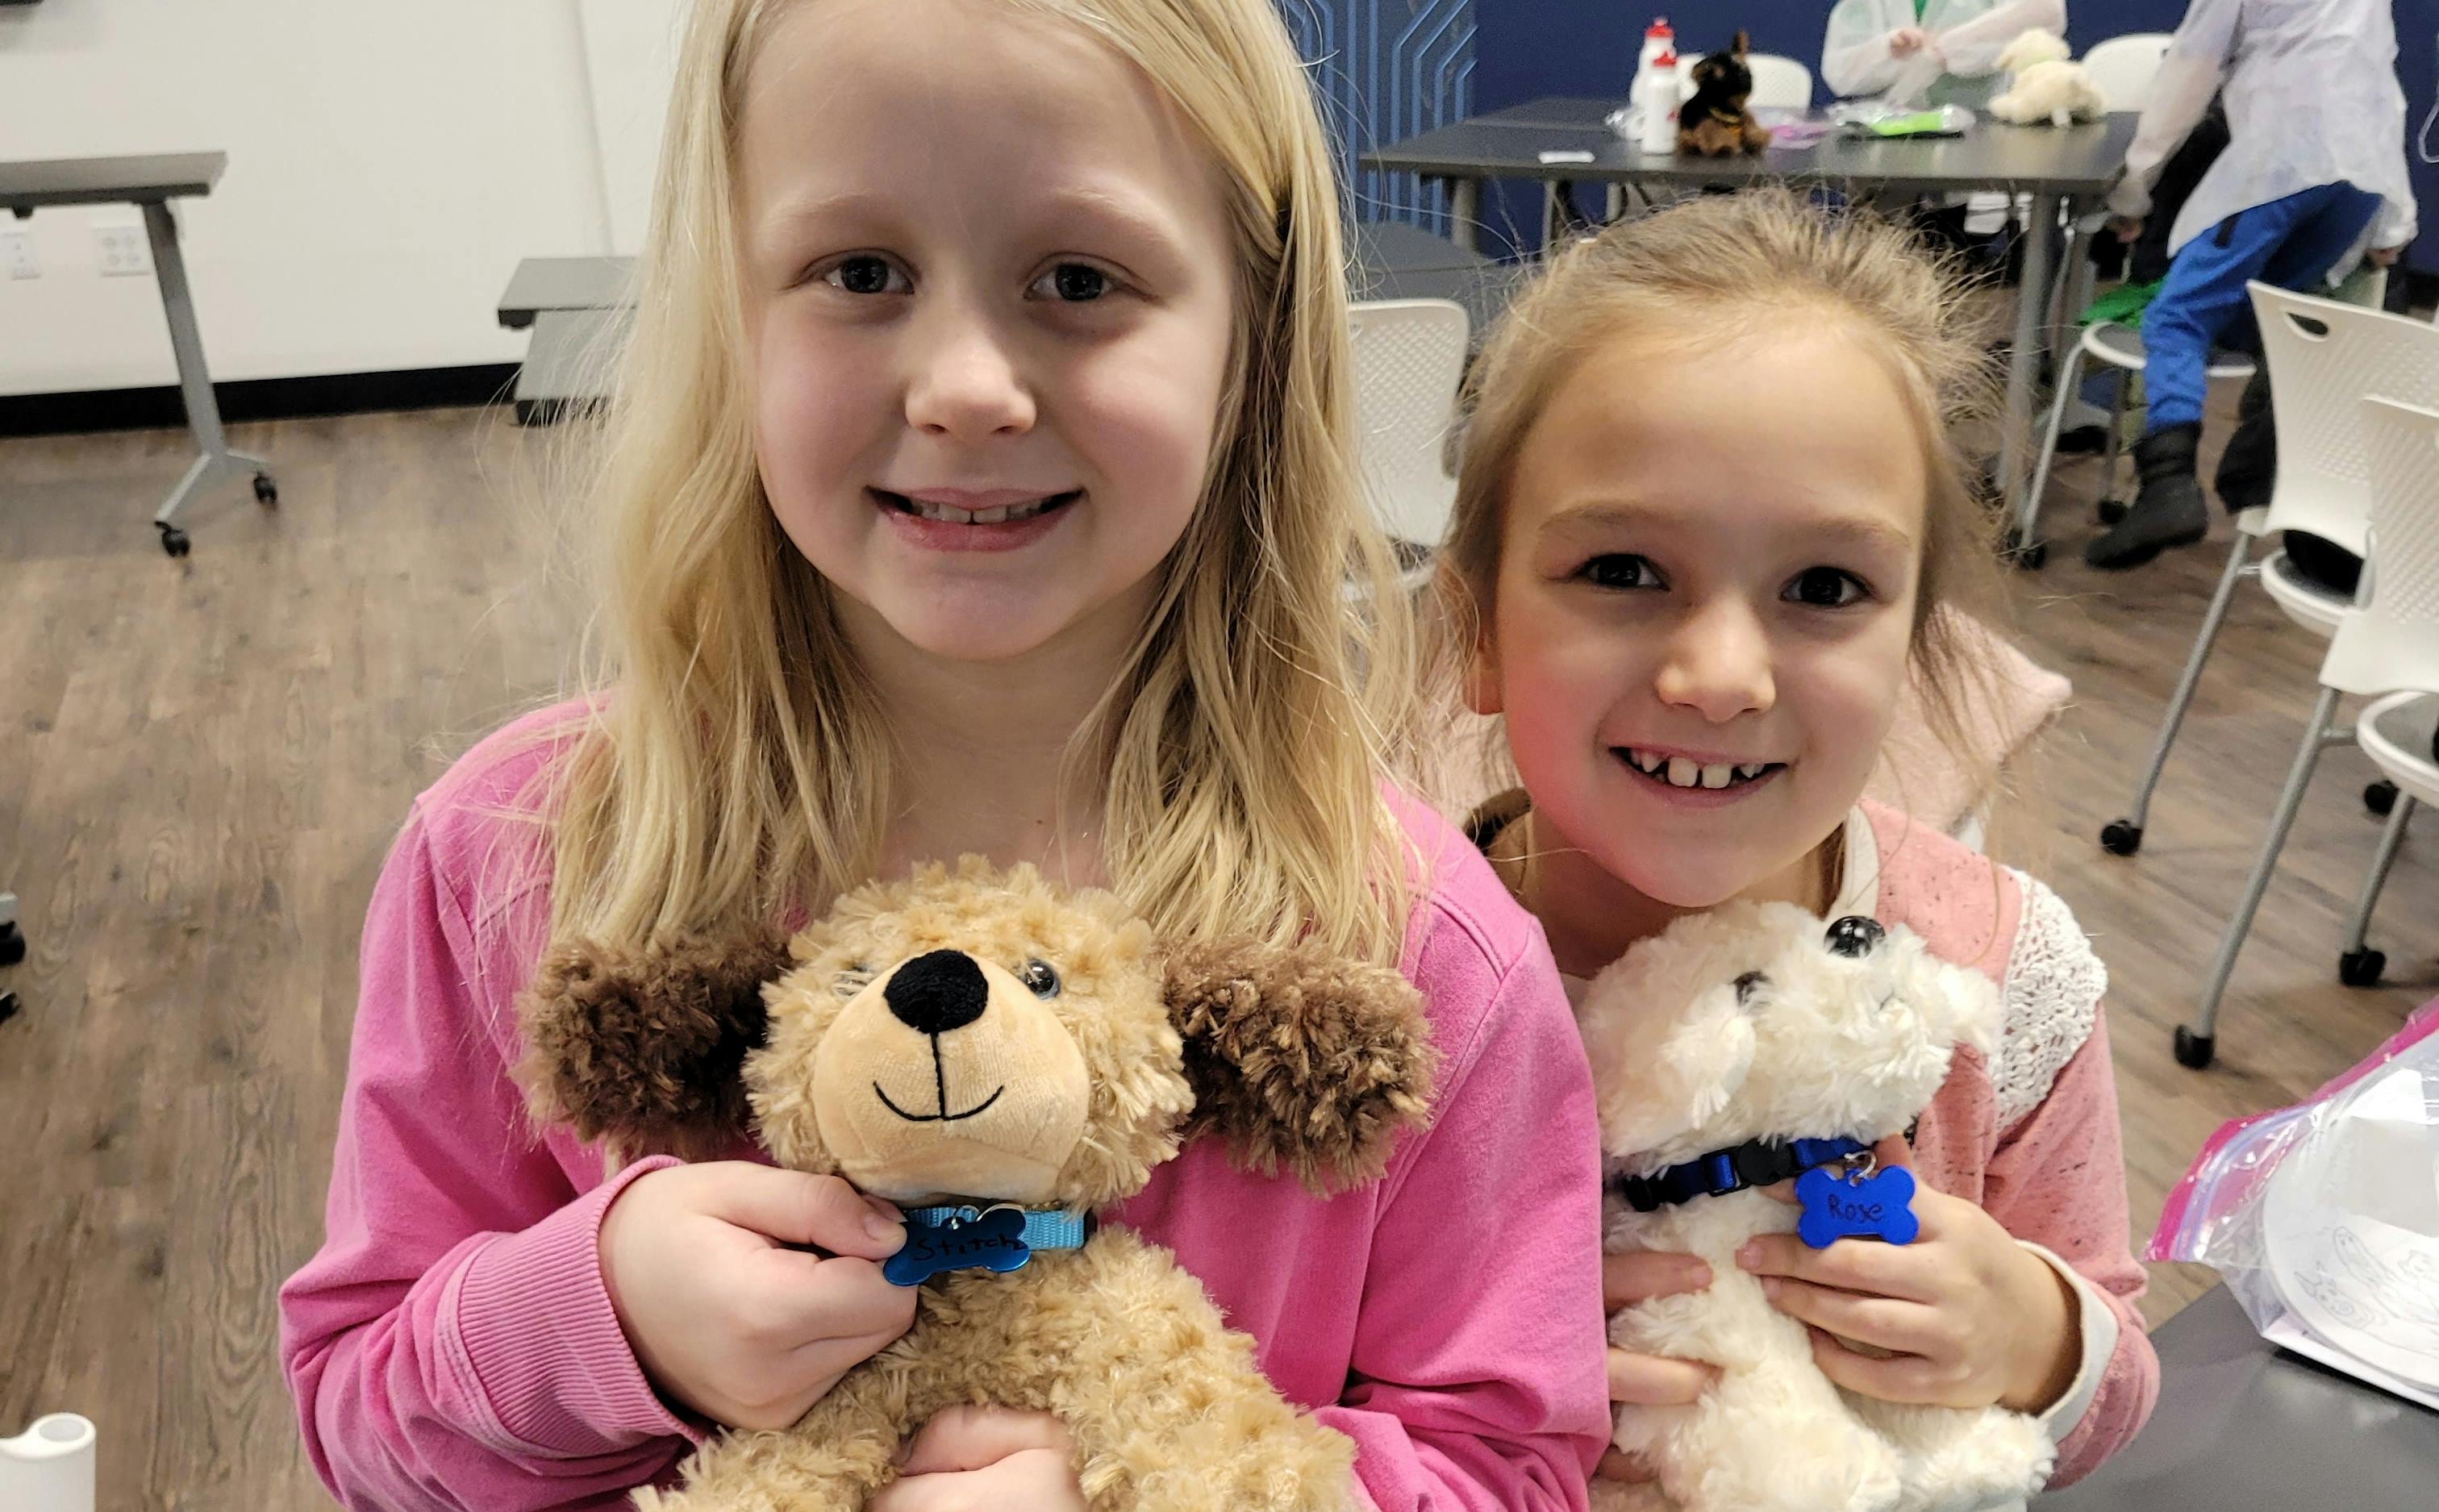 Two school-age children hold stuffed animals while smiling